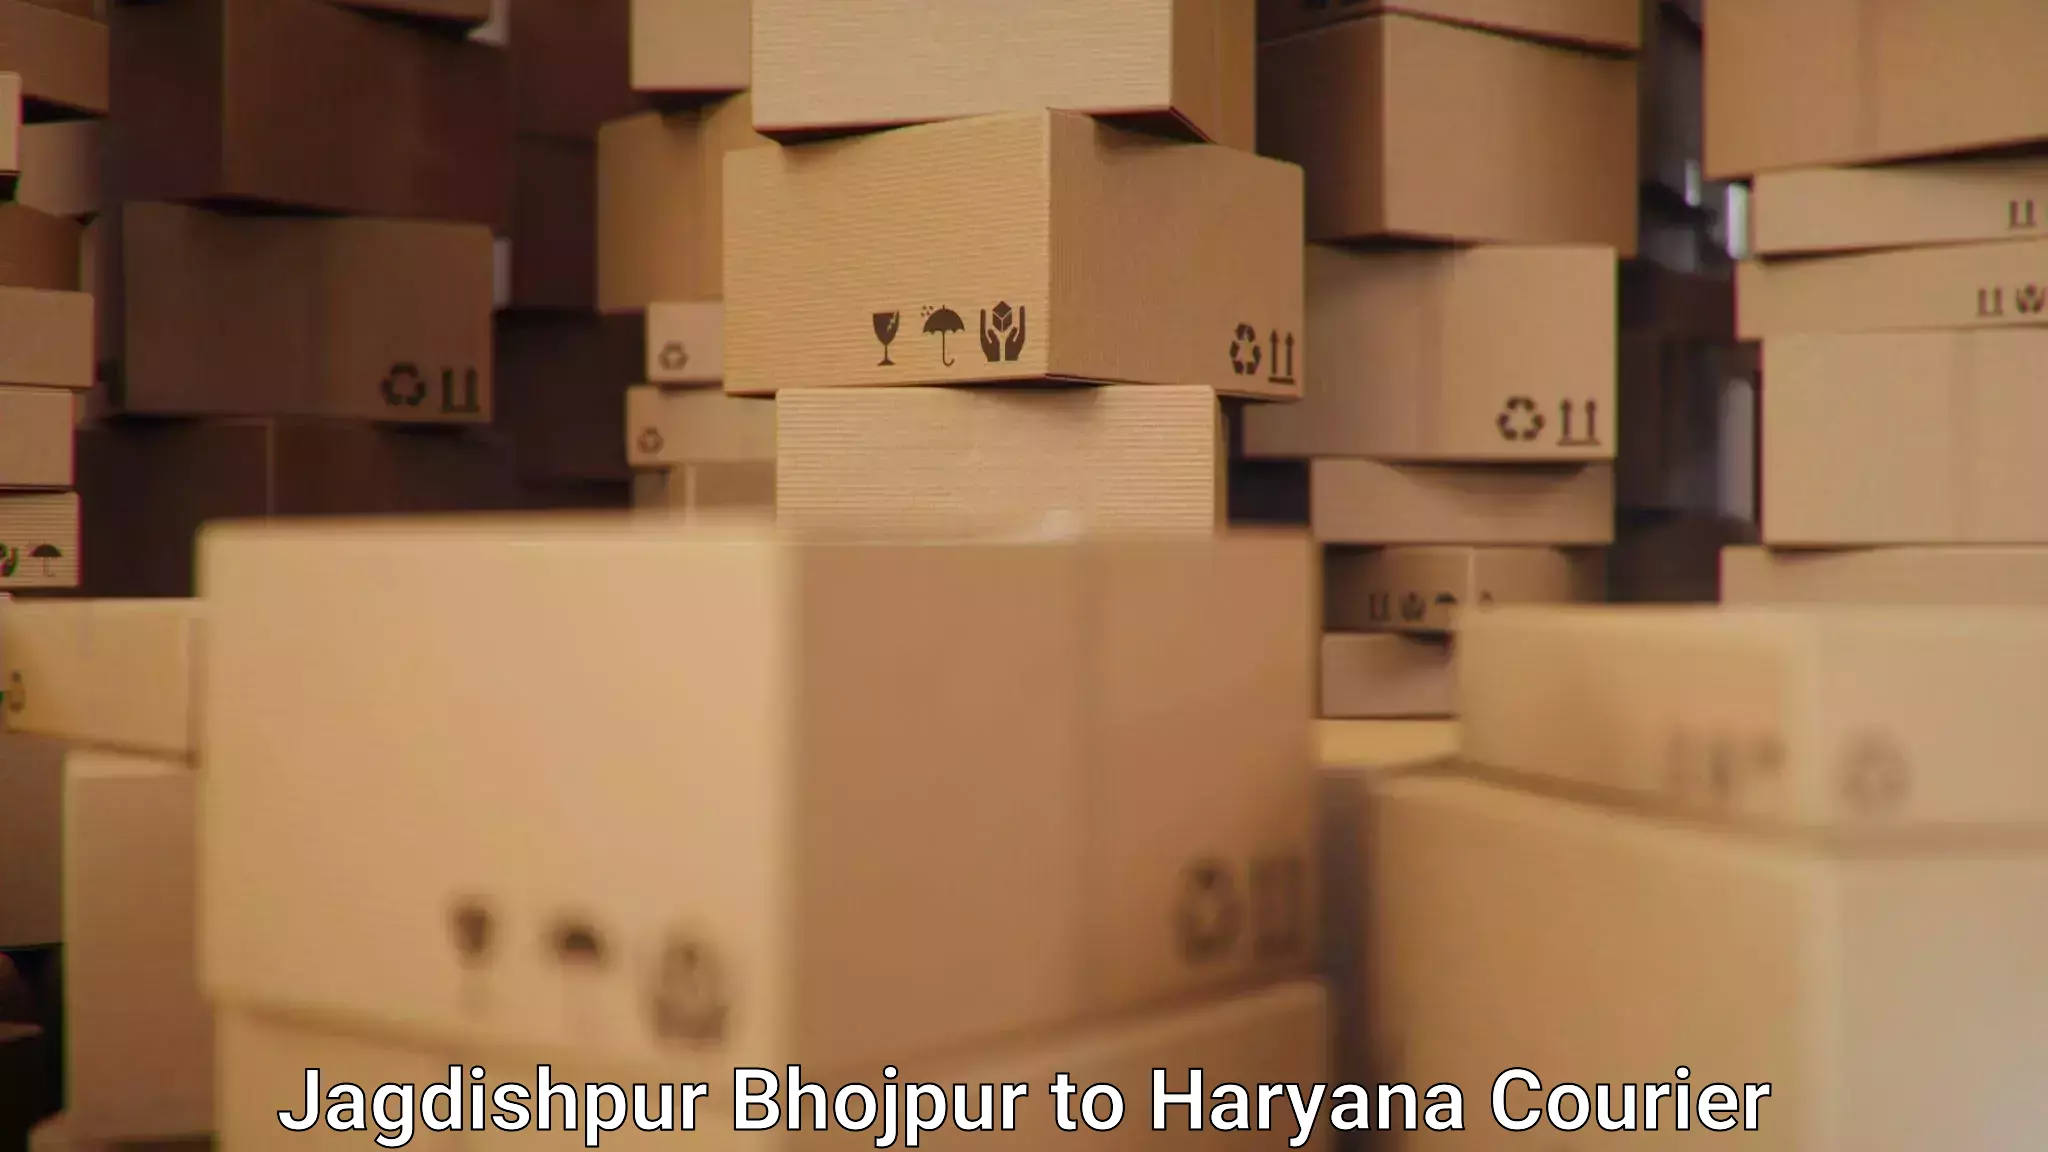 Flexible delivery scheduling in Jagdishpur Bhojpur to Haryana